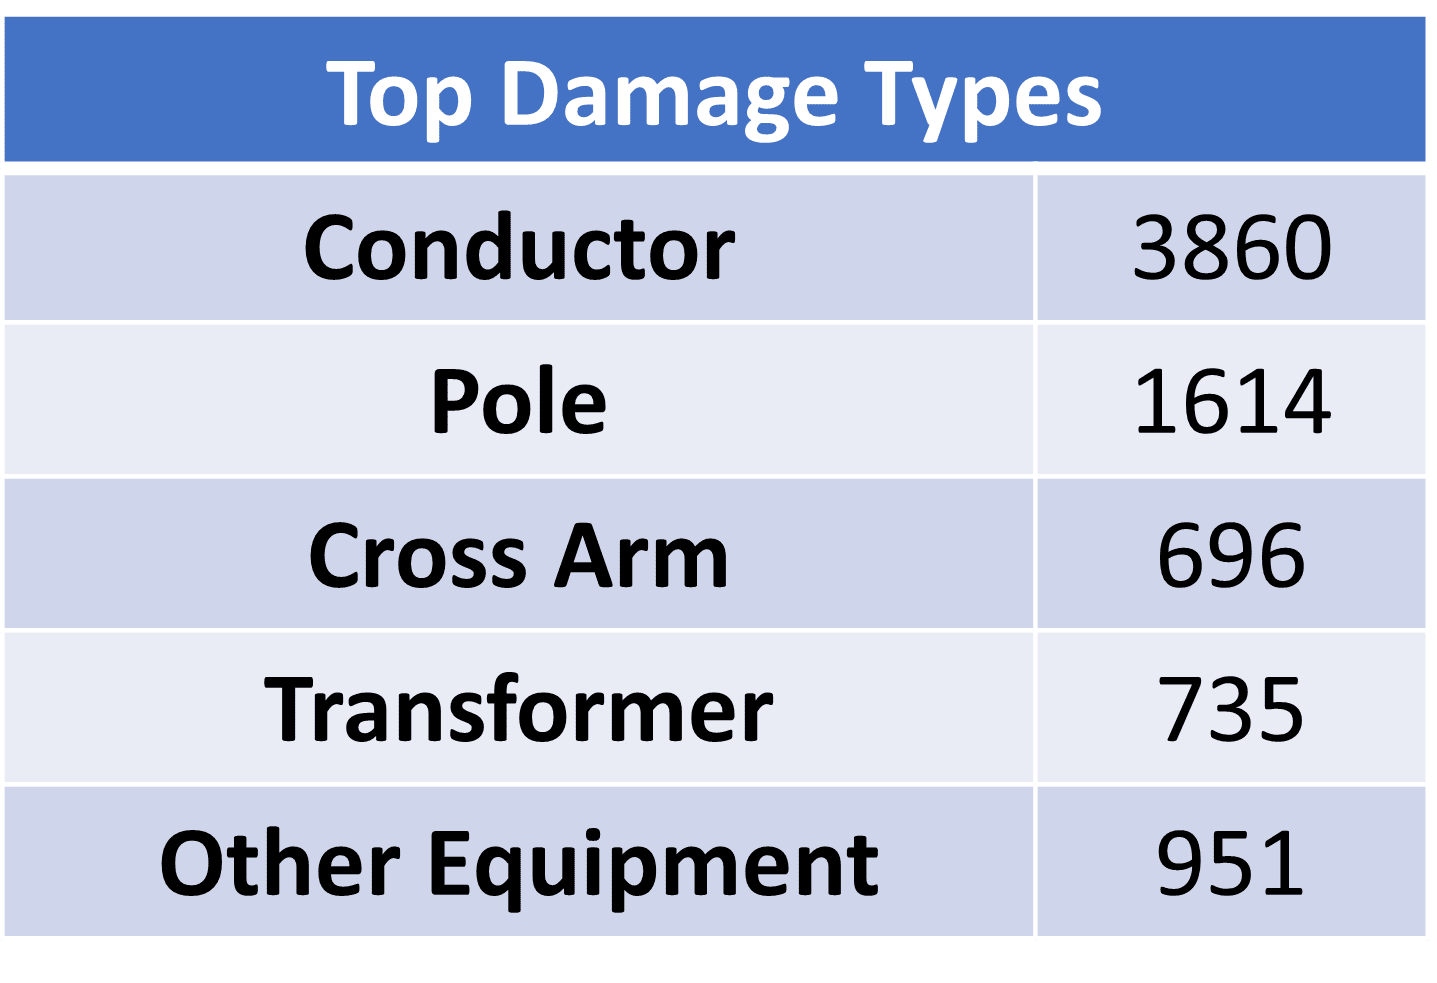 Top damage types: conductor 3860, pole 1614, cross arm 696, transformer 735, other equipment 951